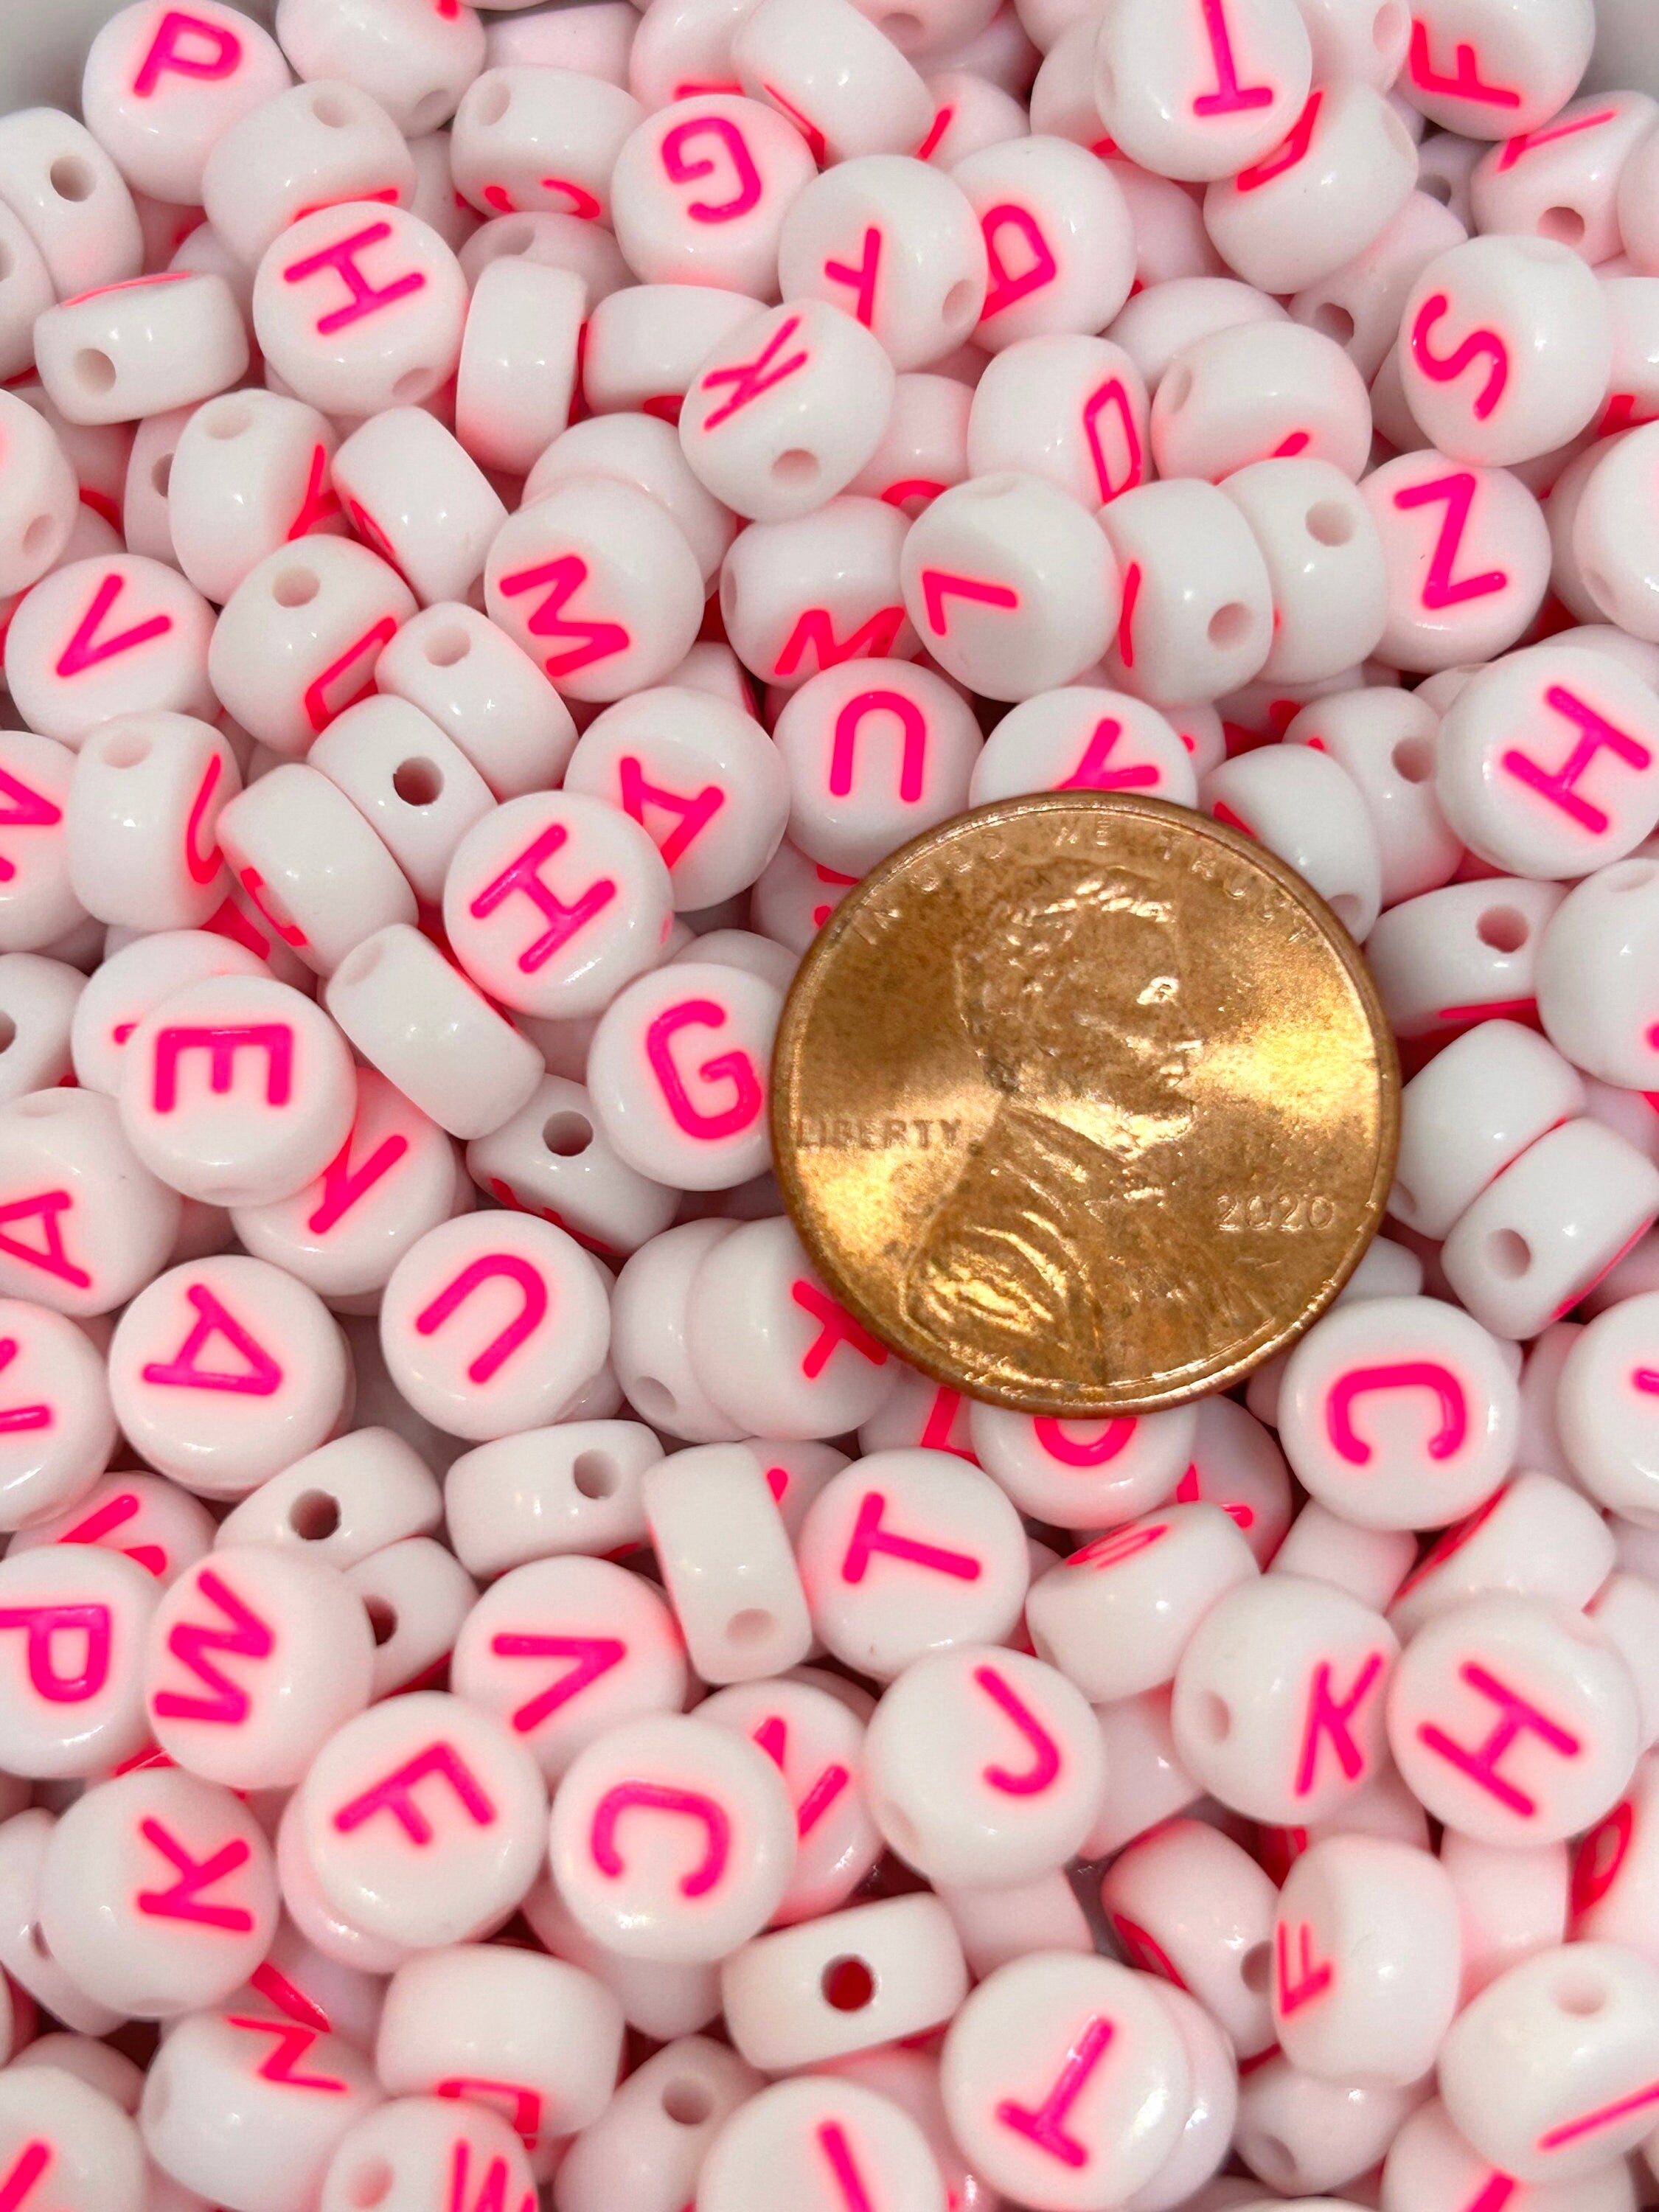 7mm Pink Mixed Letter Acrylic Beads Round Flat Alphabet Spacer Beads For  Jewelry Making Handmade Diy Bracelet Necklace